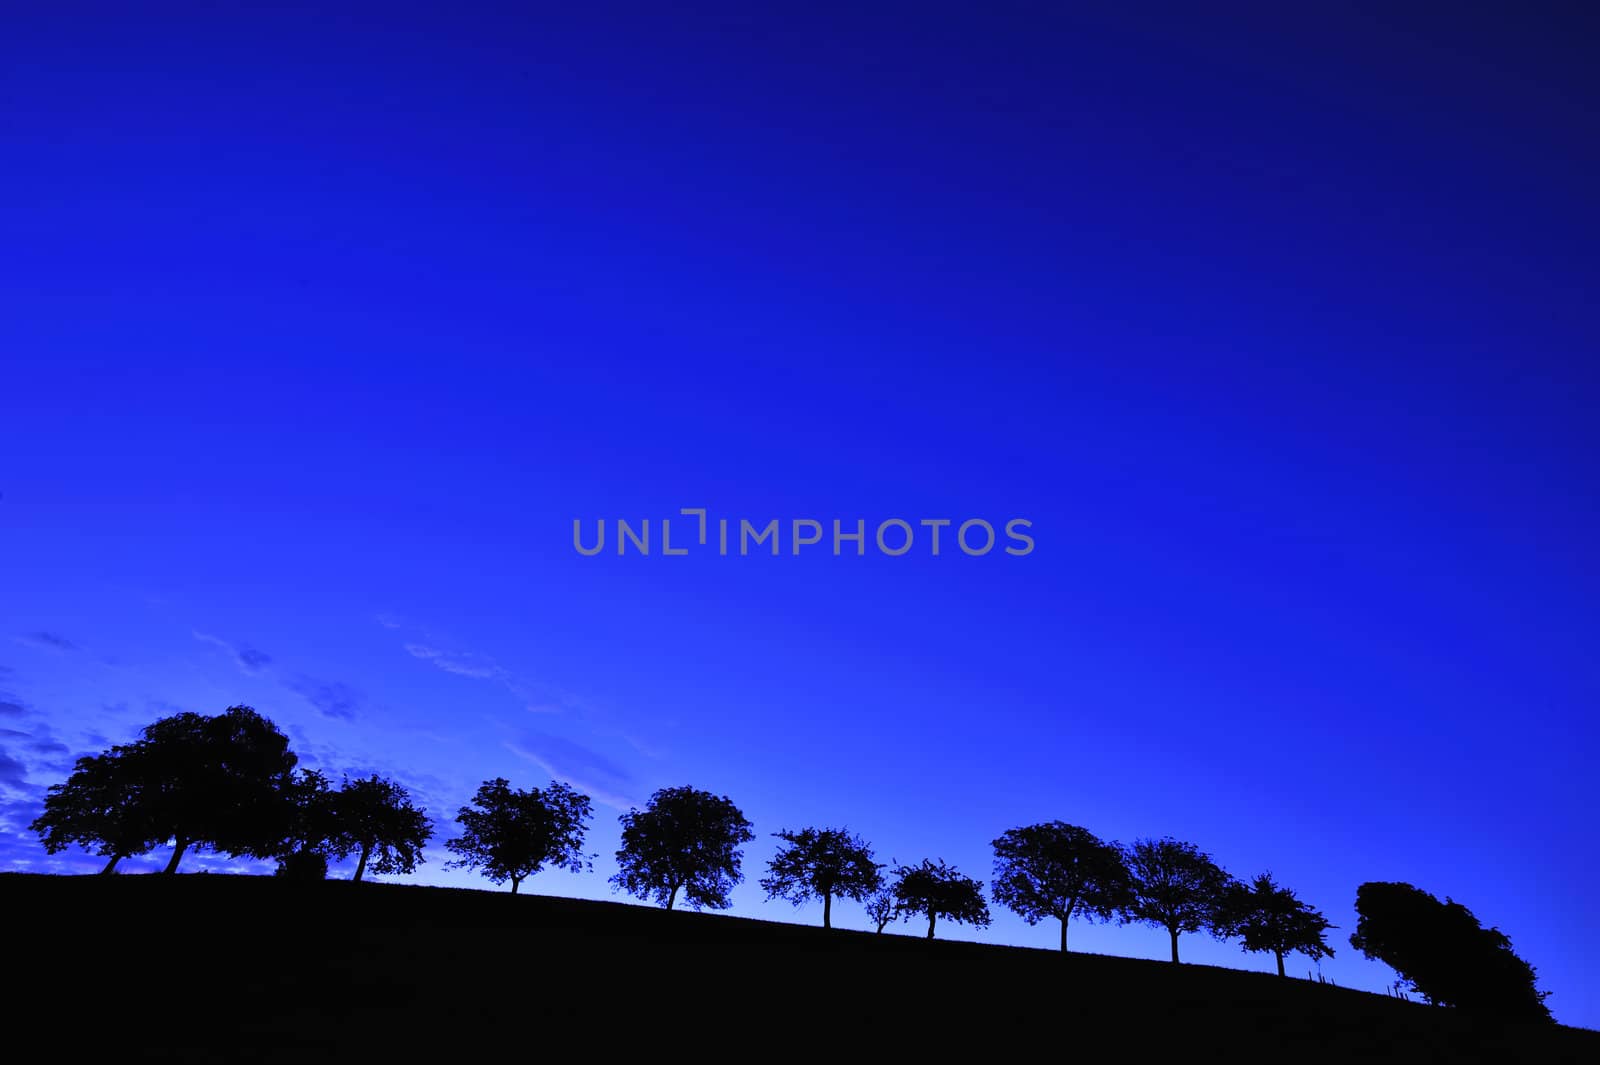 A hillside at dawn, with a line of silhouetted trees under a clear, deep blue, sky.